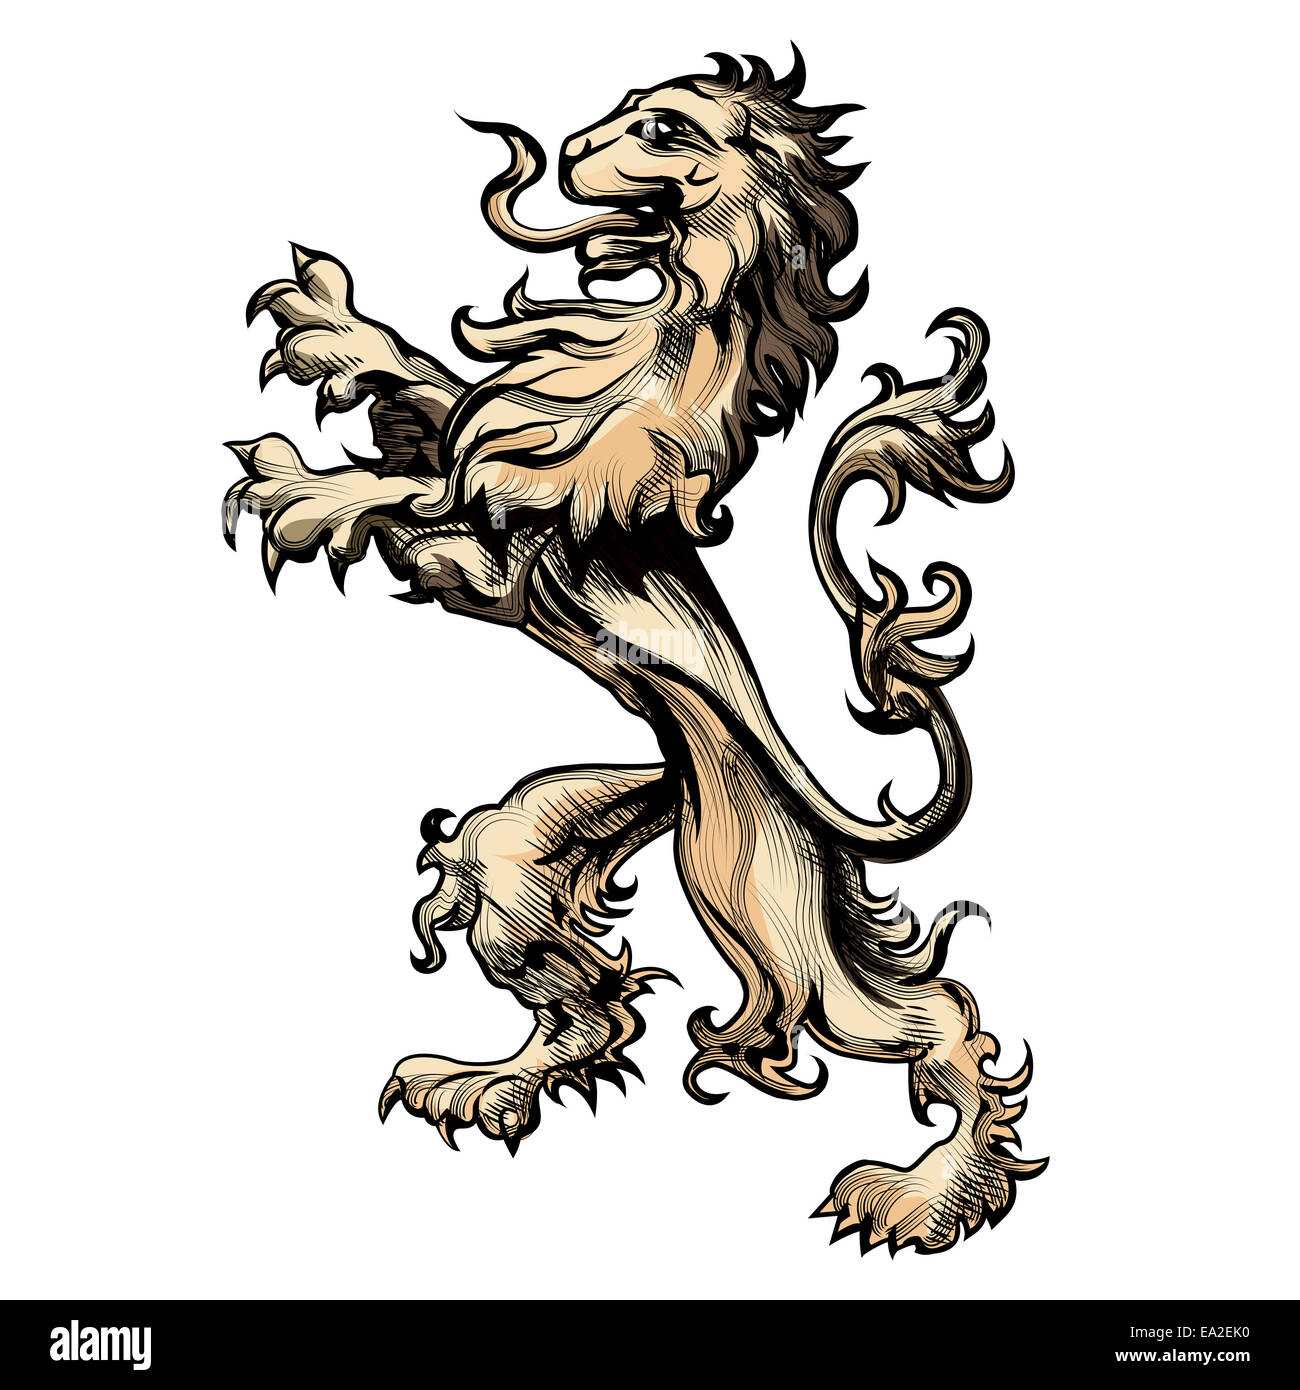 Heraldry lion drawn in engraving style Stock Photo